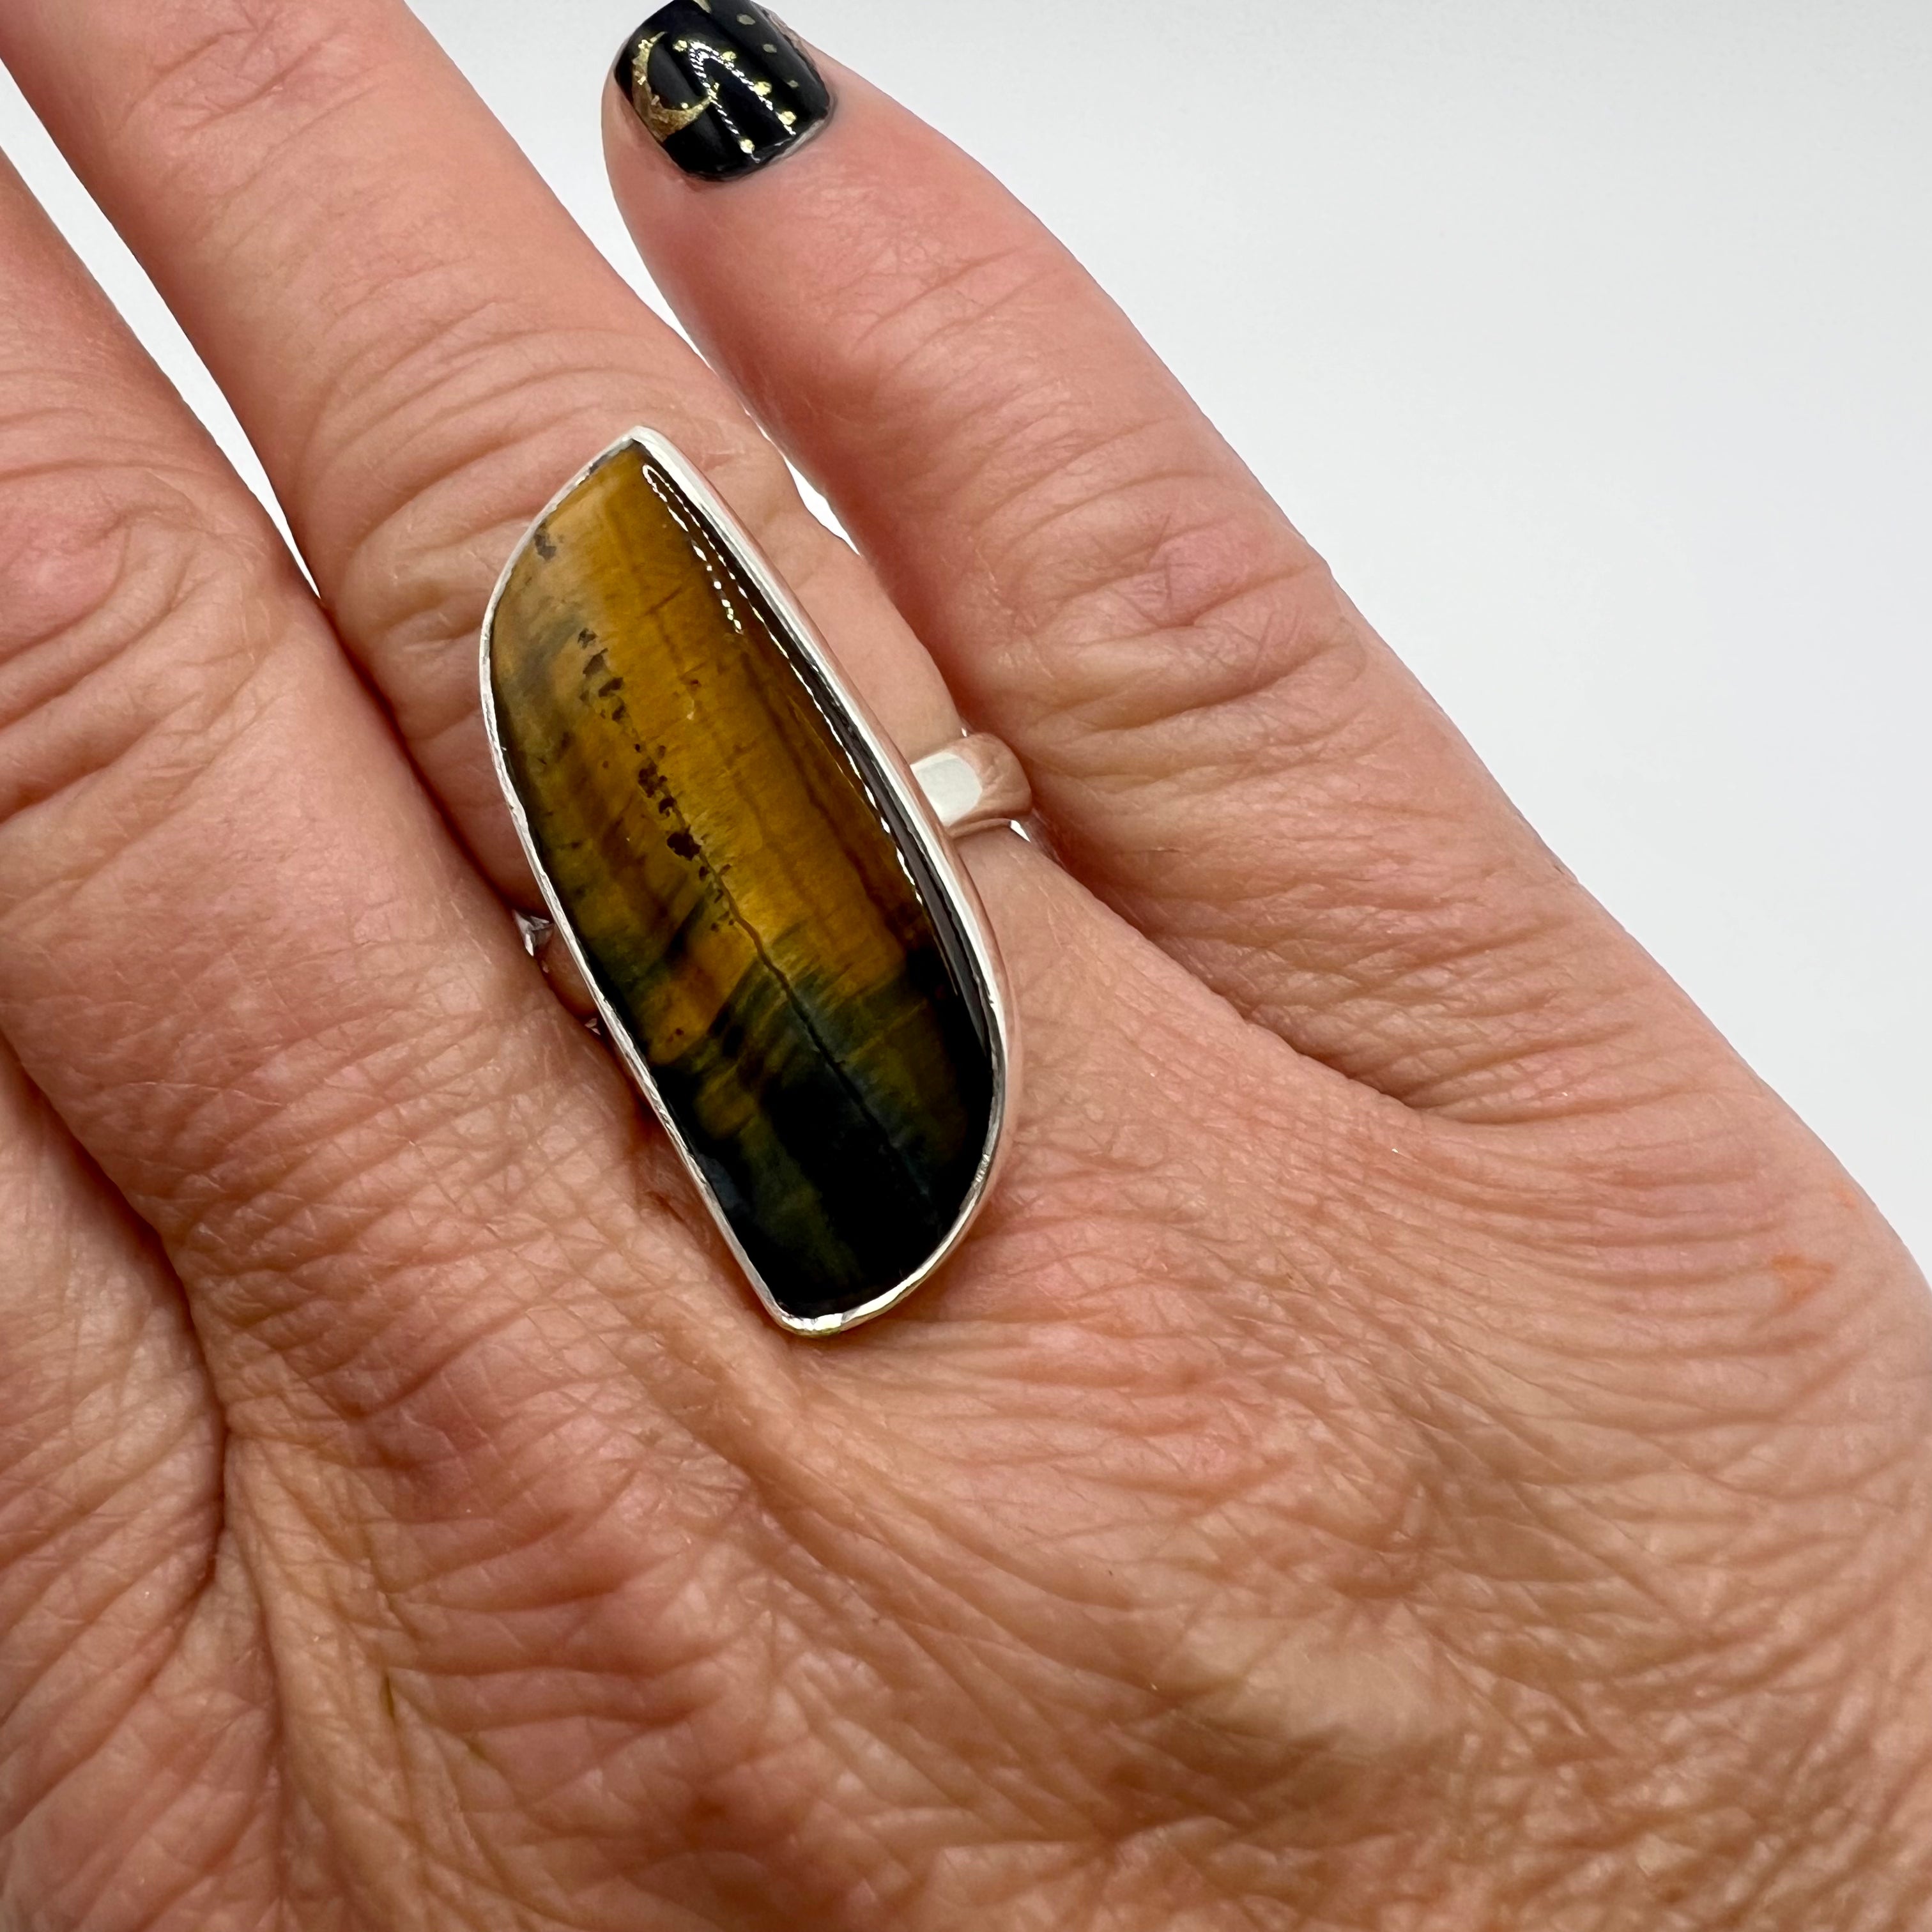 Tigerseye sterling silver ring (adjustable size)